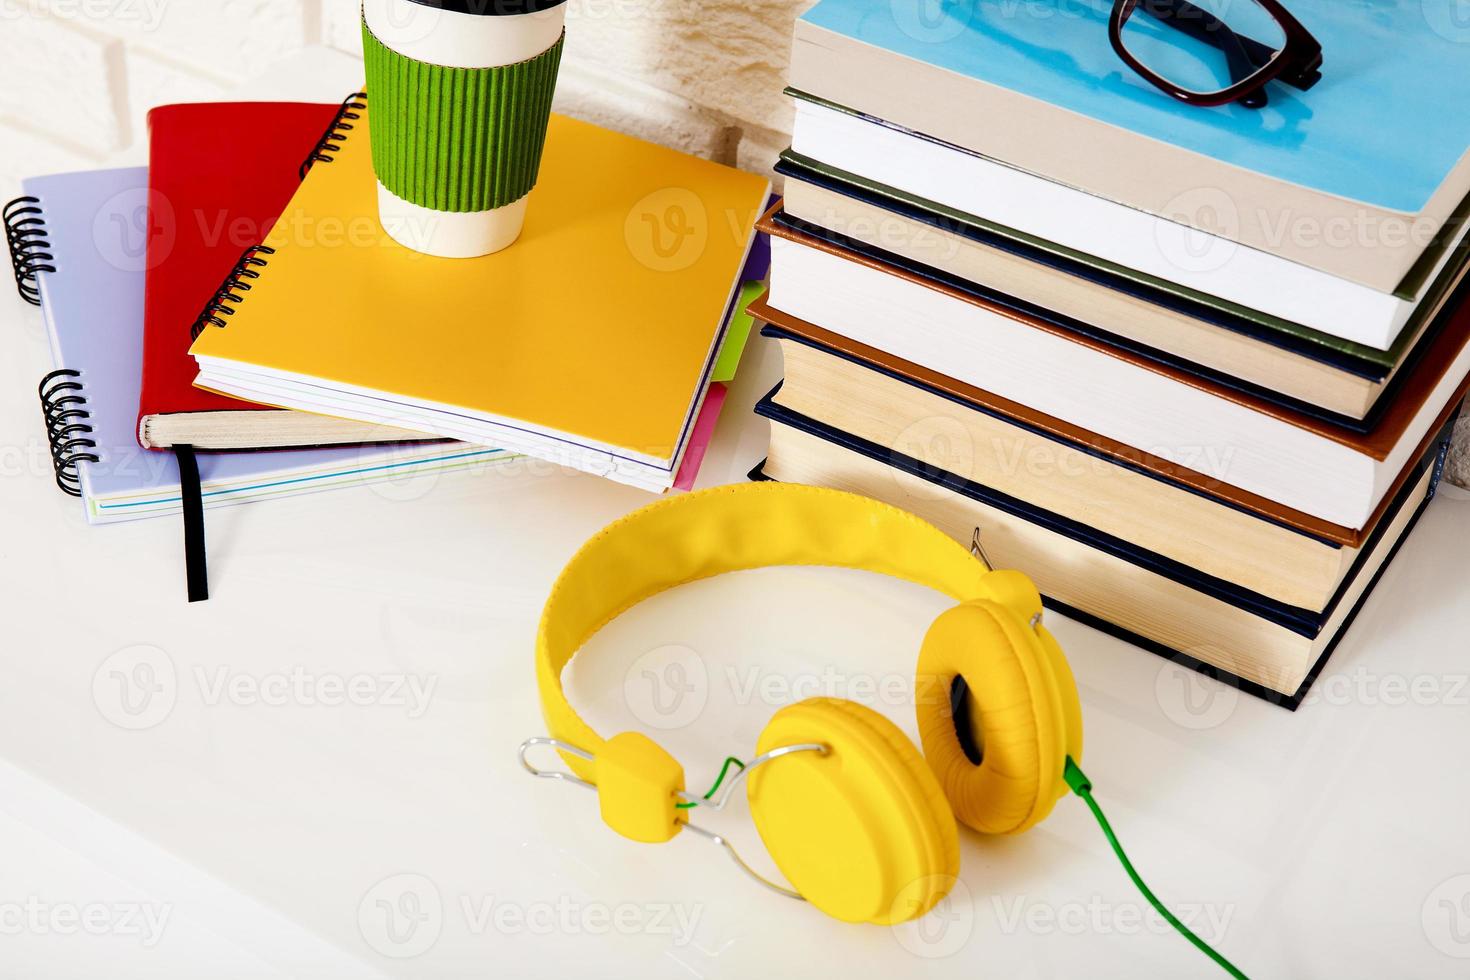 Workspace and education accessories on the table. Cup of coffee, books, glasses, notebooks, headphones. Stem education photo